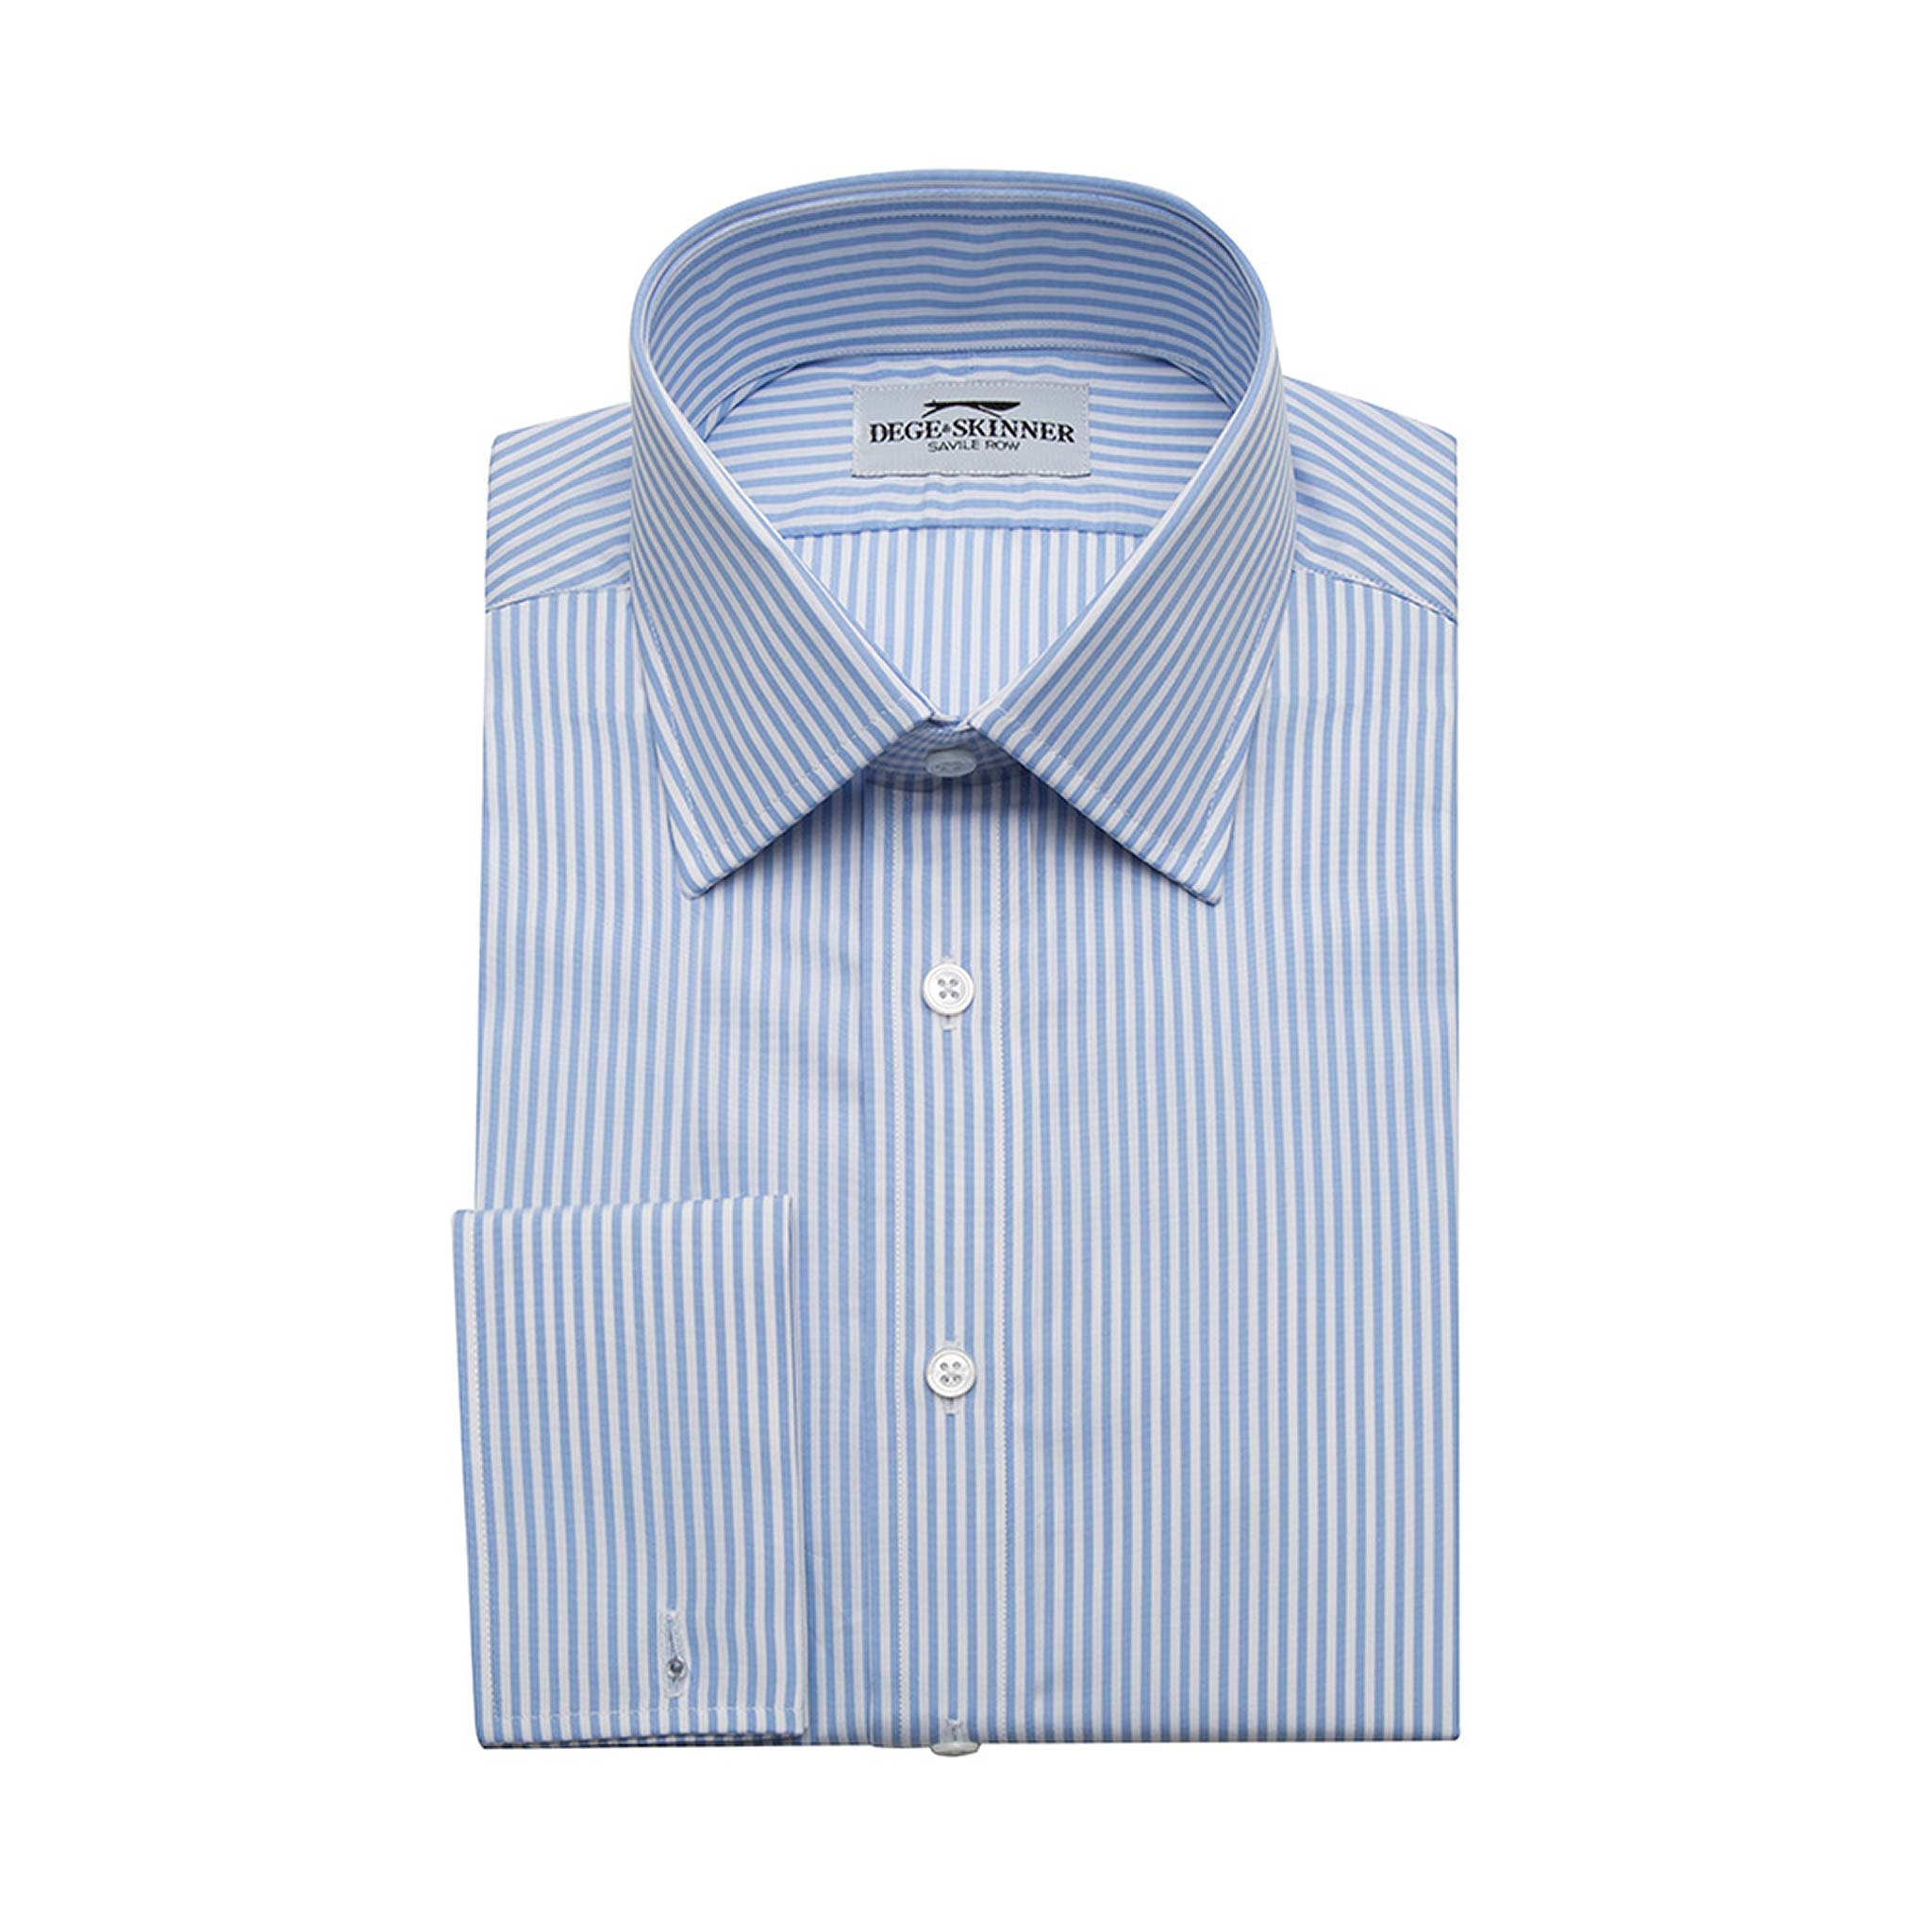 Sky Blue Bengal Stripe Cotton Shirt, Double French Cuff - Dege & Skinner